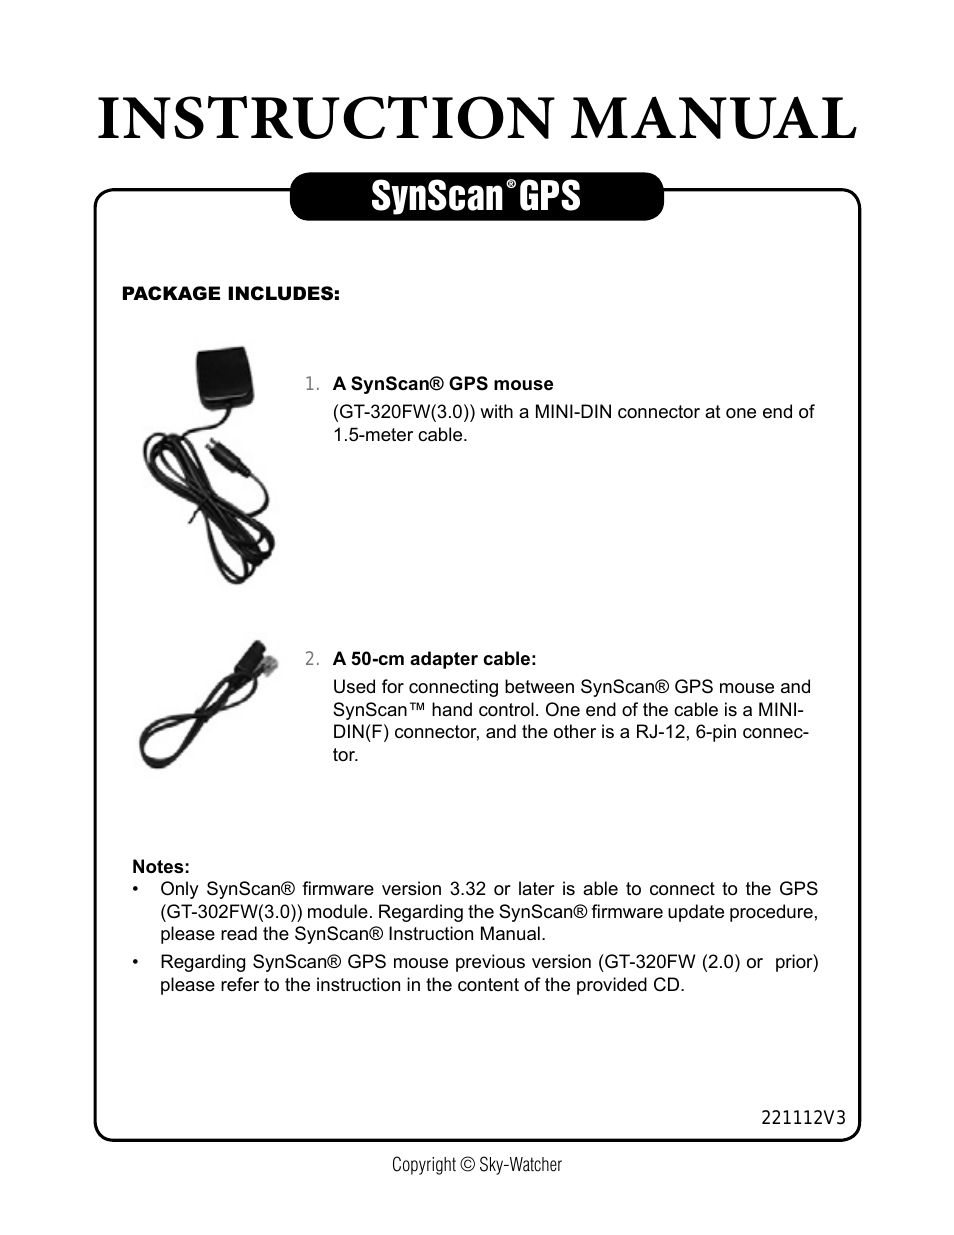 SYNSCAN GPS